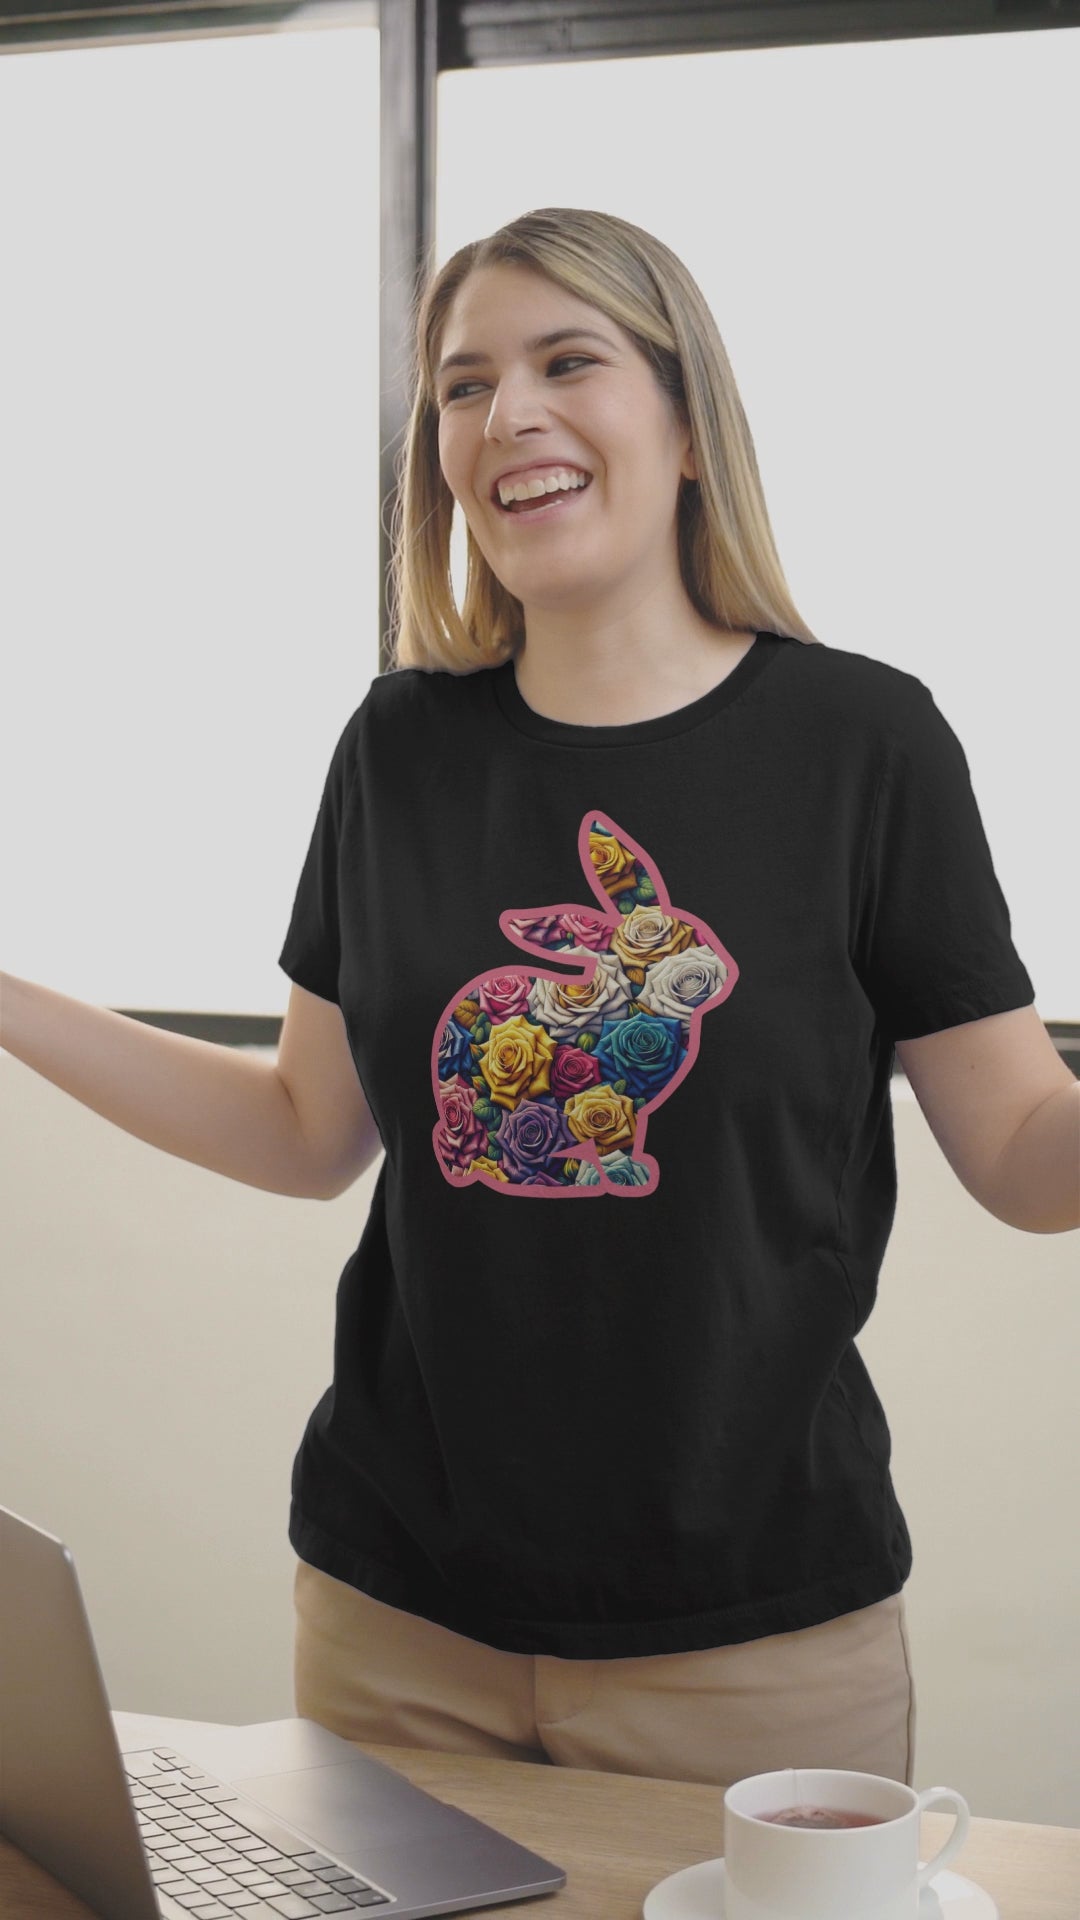 Easter Bunny Floral Multicolored Roses T-Shirt - Women's Easter Tee-6